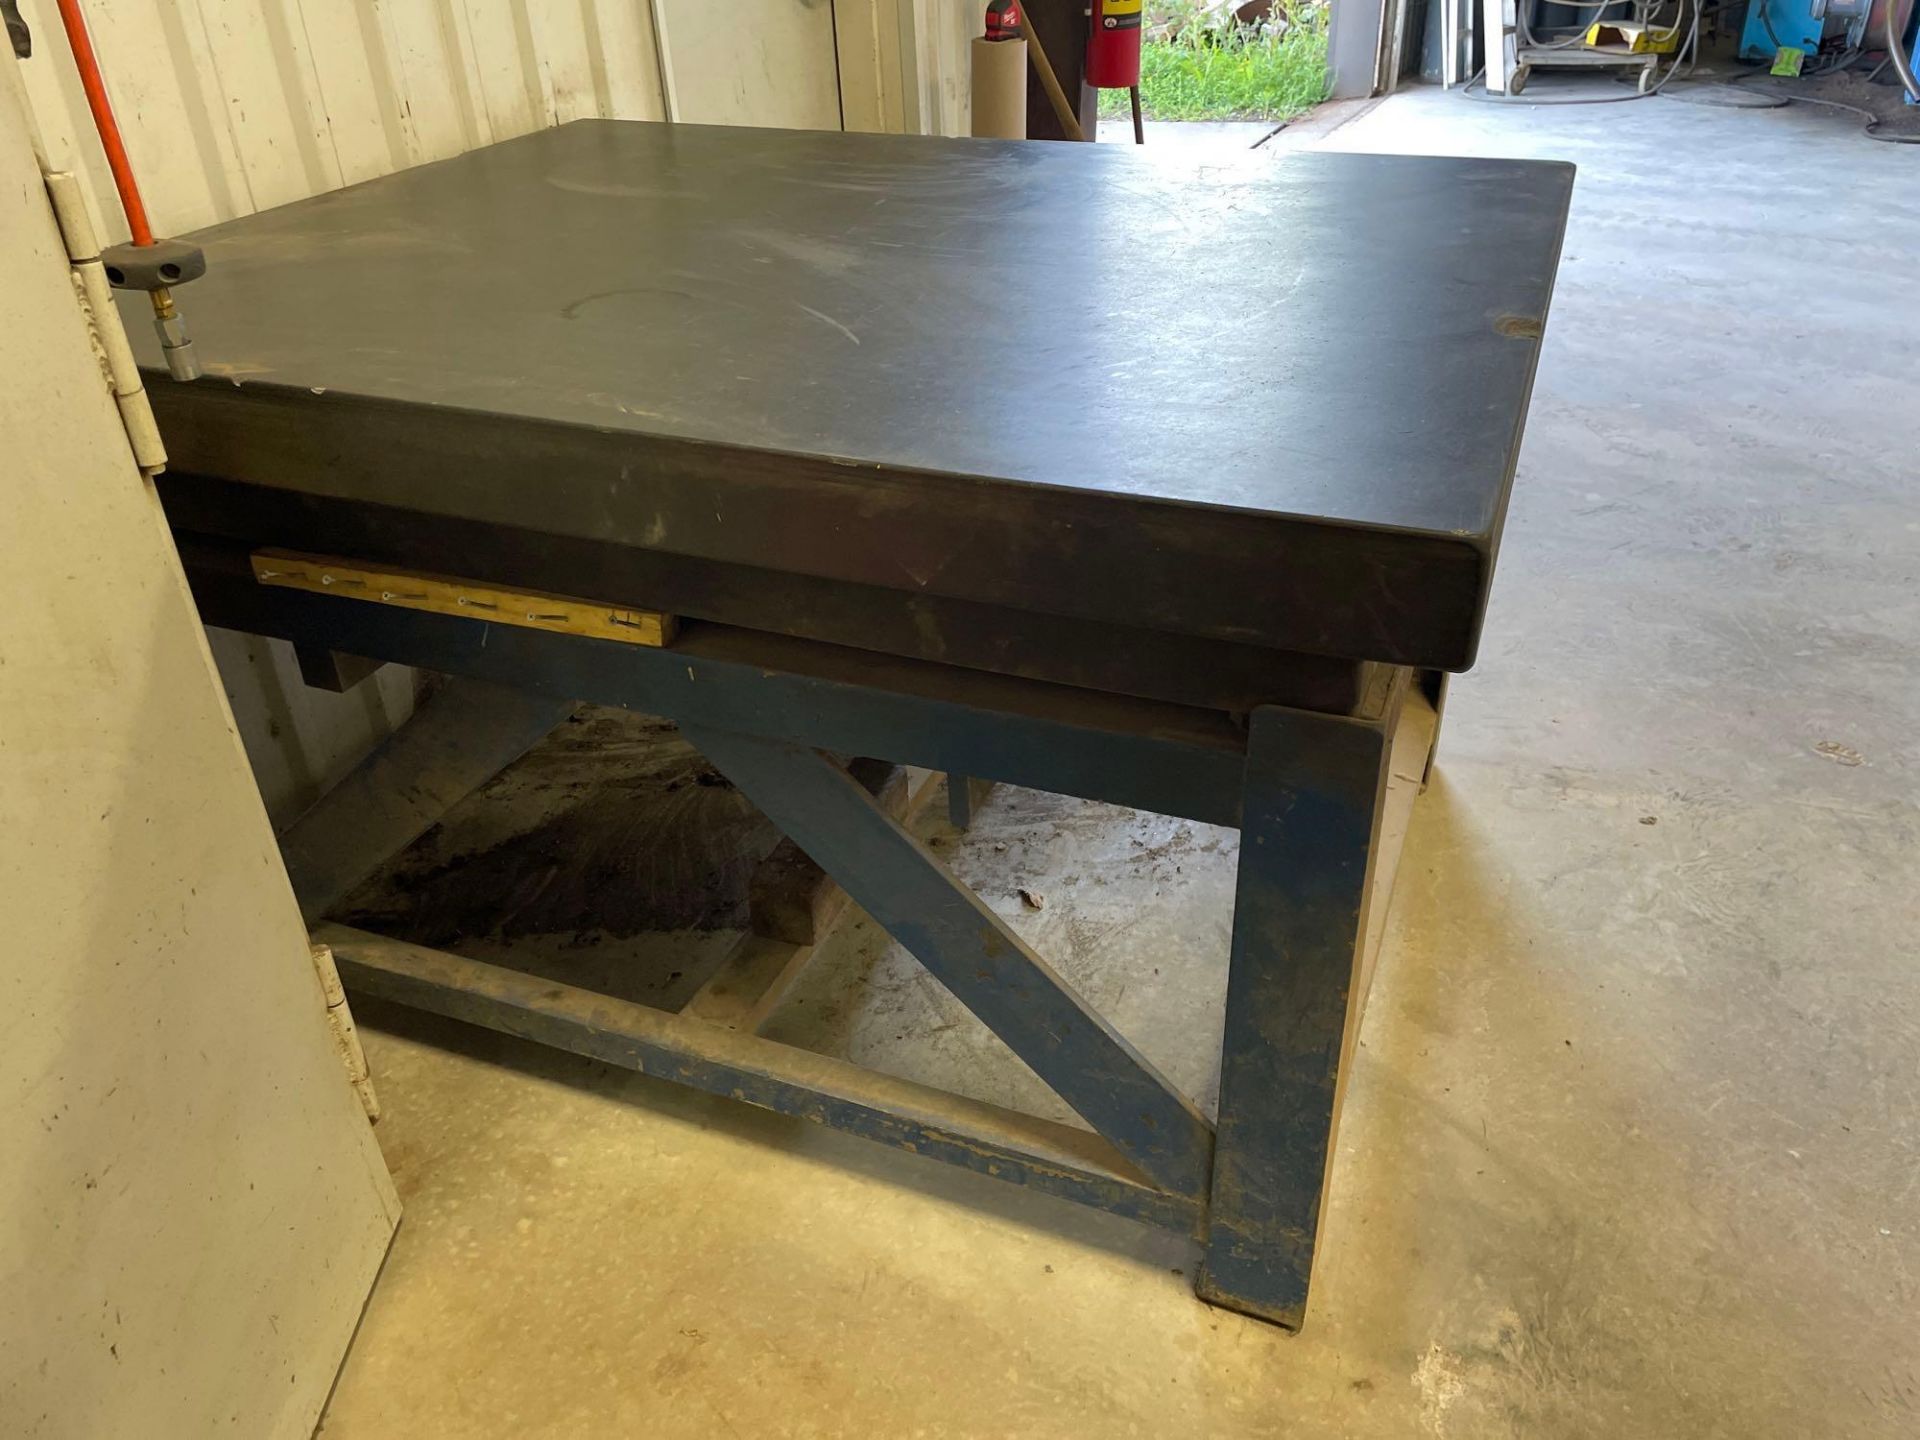 60” X 48” X 4” Granite Table on Heavy Duty Metal Base Overall Height 35” - Image 3 of 6